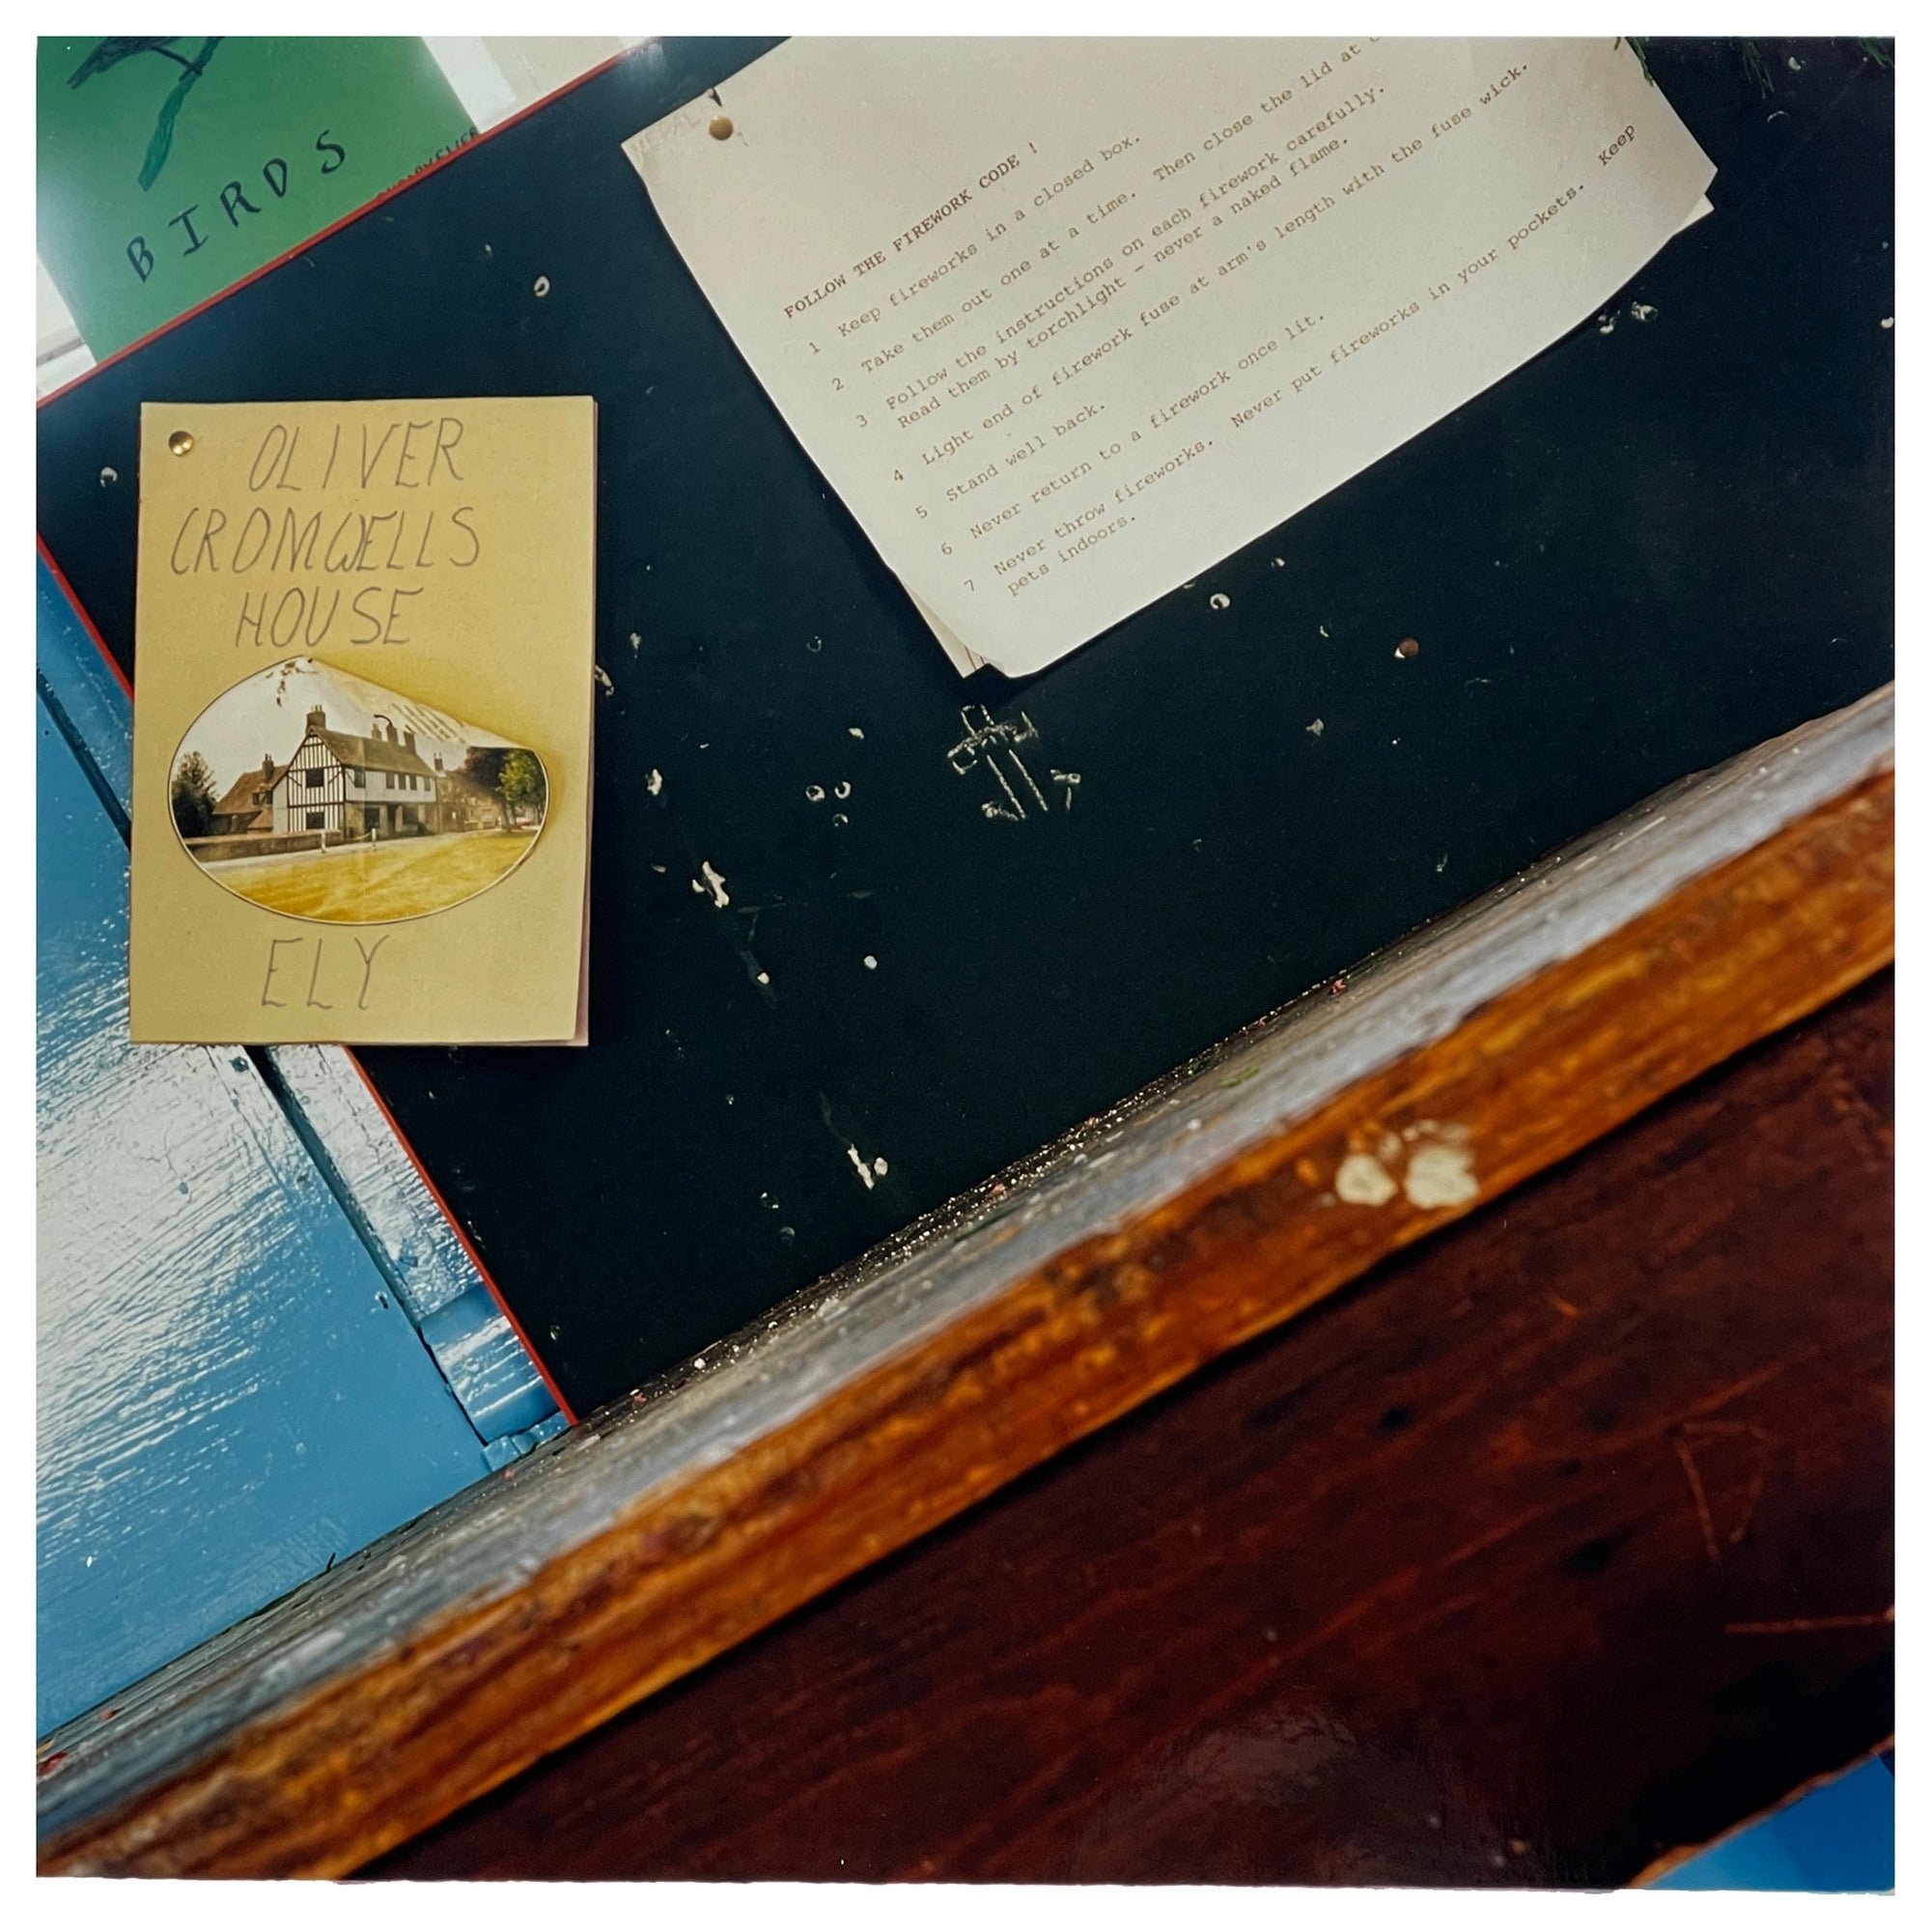 Photograph by Richard Heeps.  A noticeboard in a Scout Hut has a handmade leaflet for Oliver Cromwell's House pinned on it.  This sits alongside an old typed note on the Firework Code.